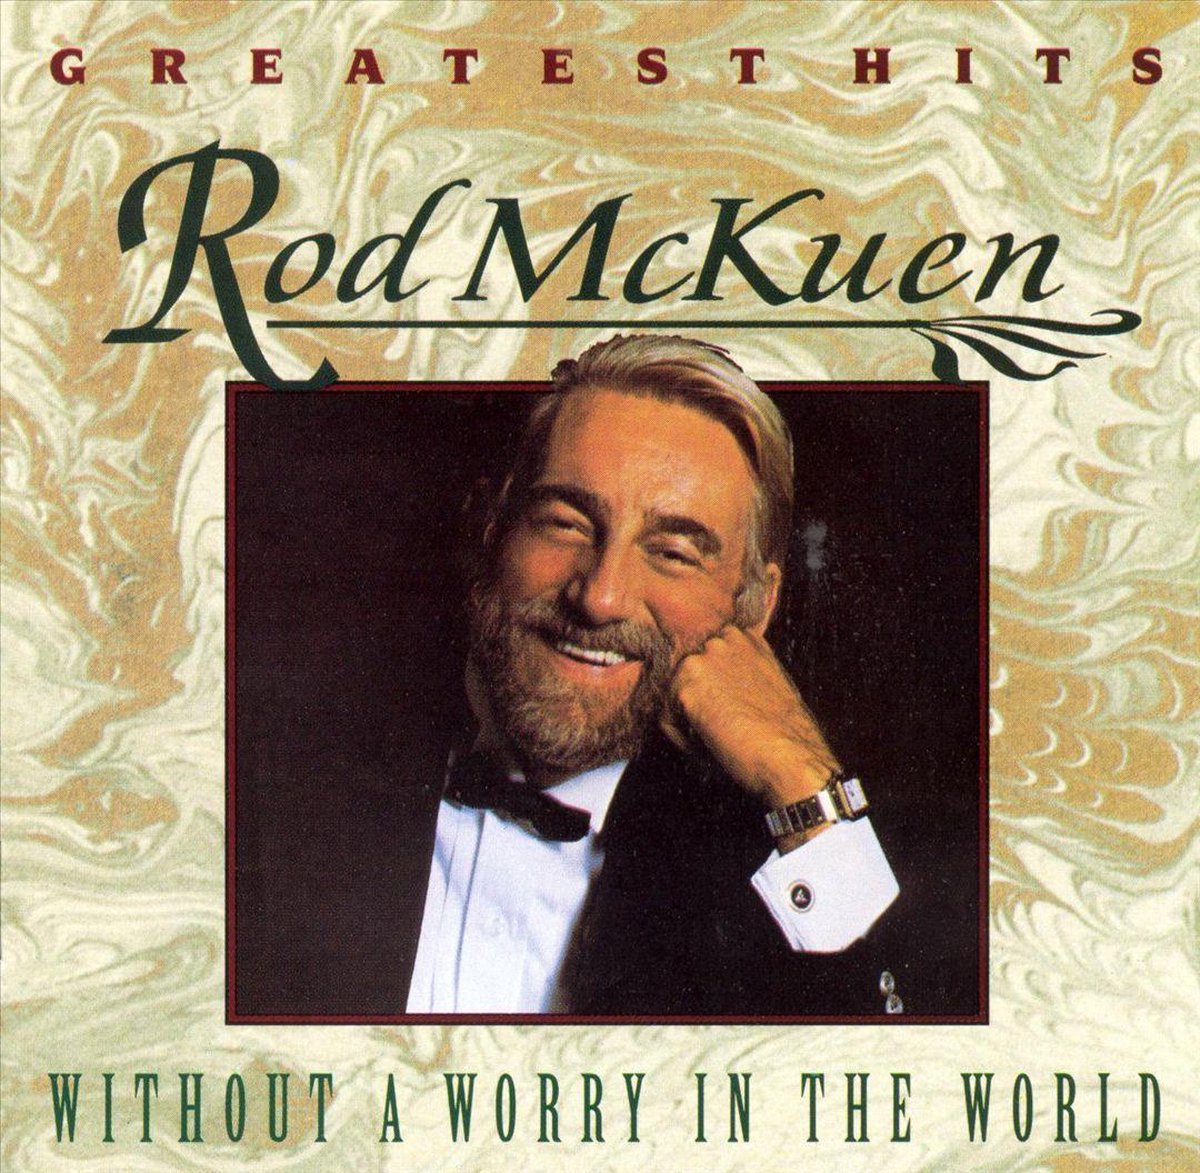 Greatest Hits/Without A Worry In The World - Rod McKuen